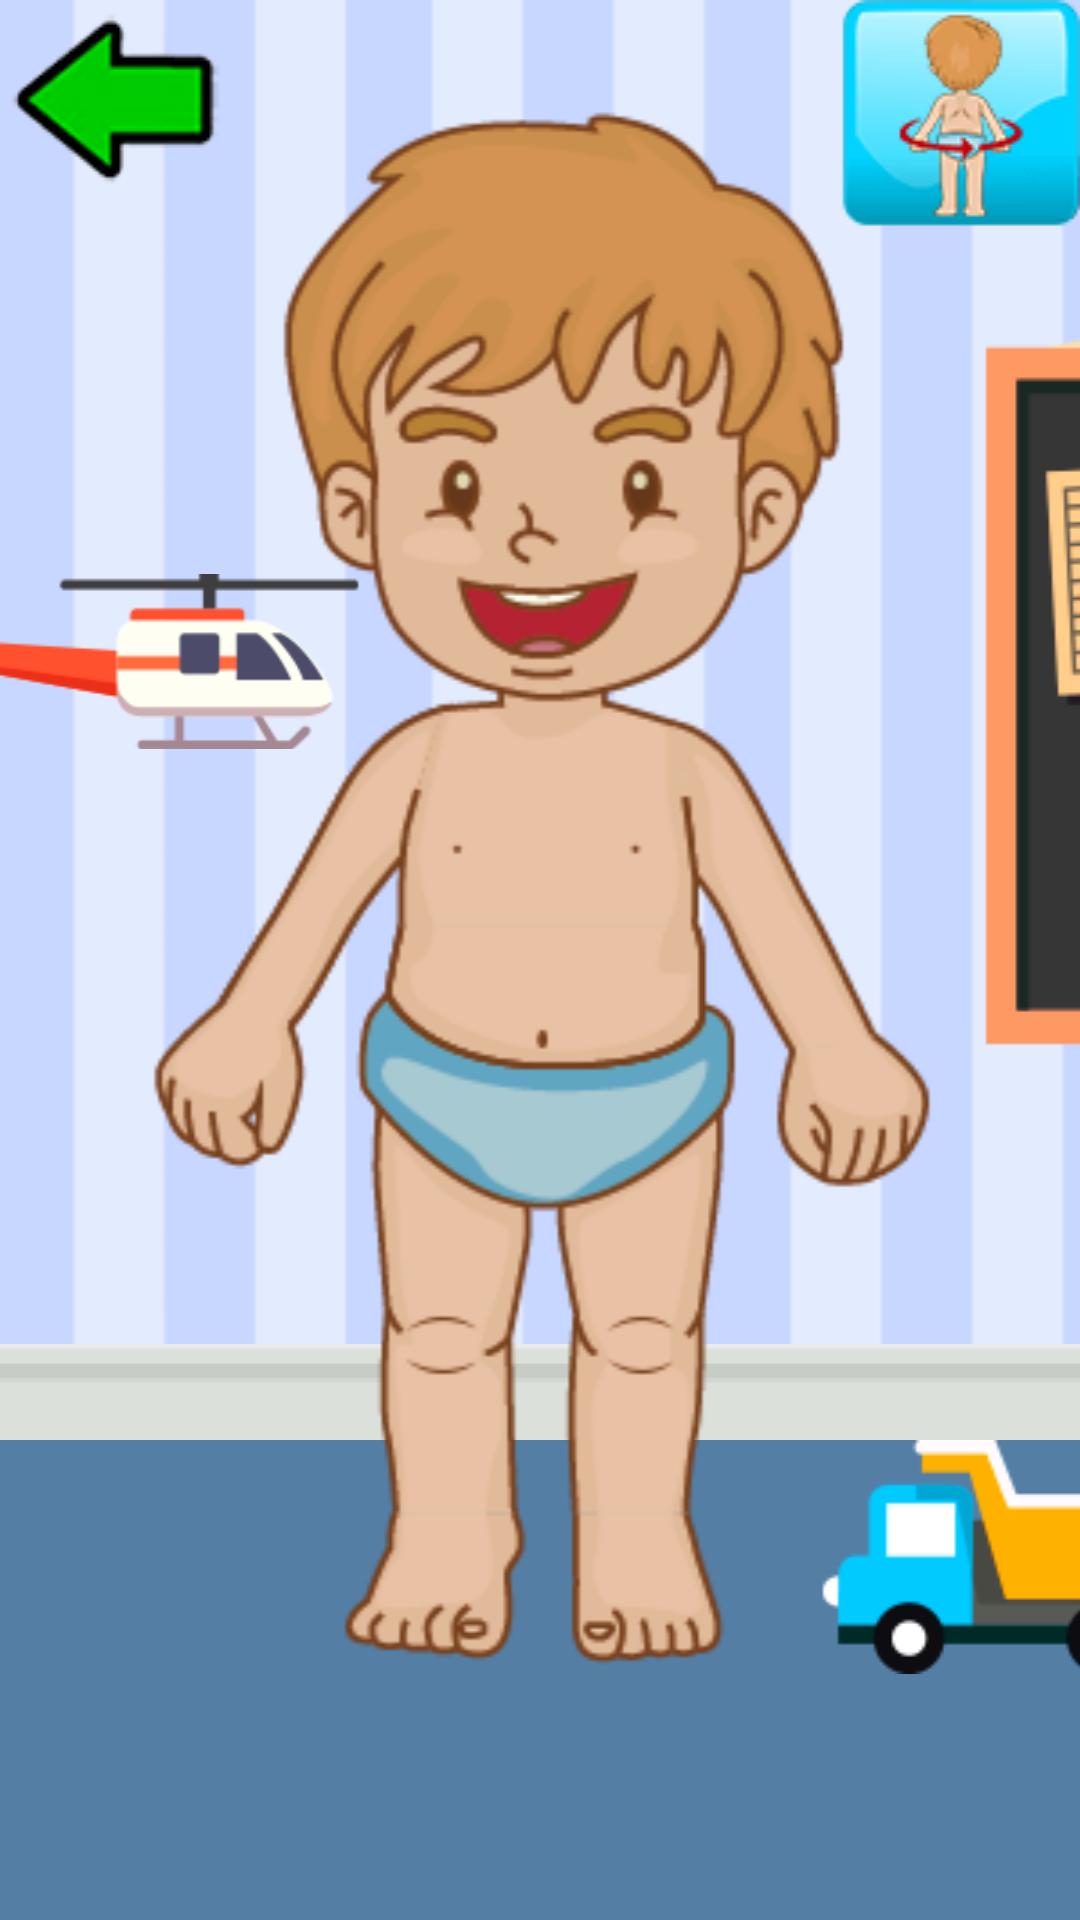 Body Parts for Kids pch_1.2.25 Screenshot 2